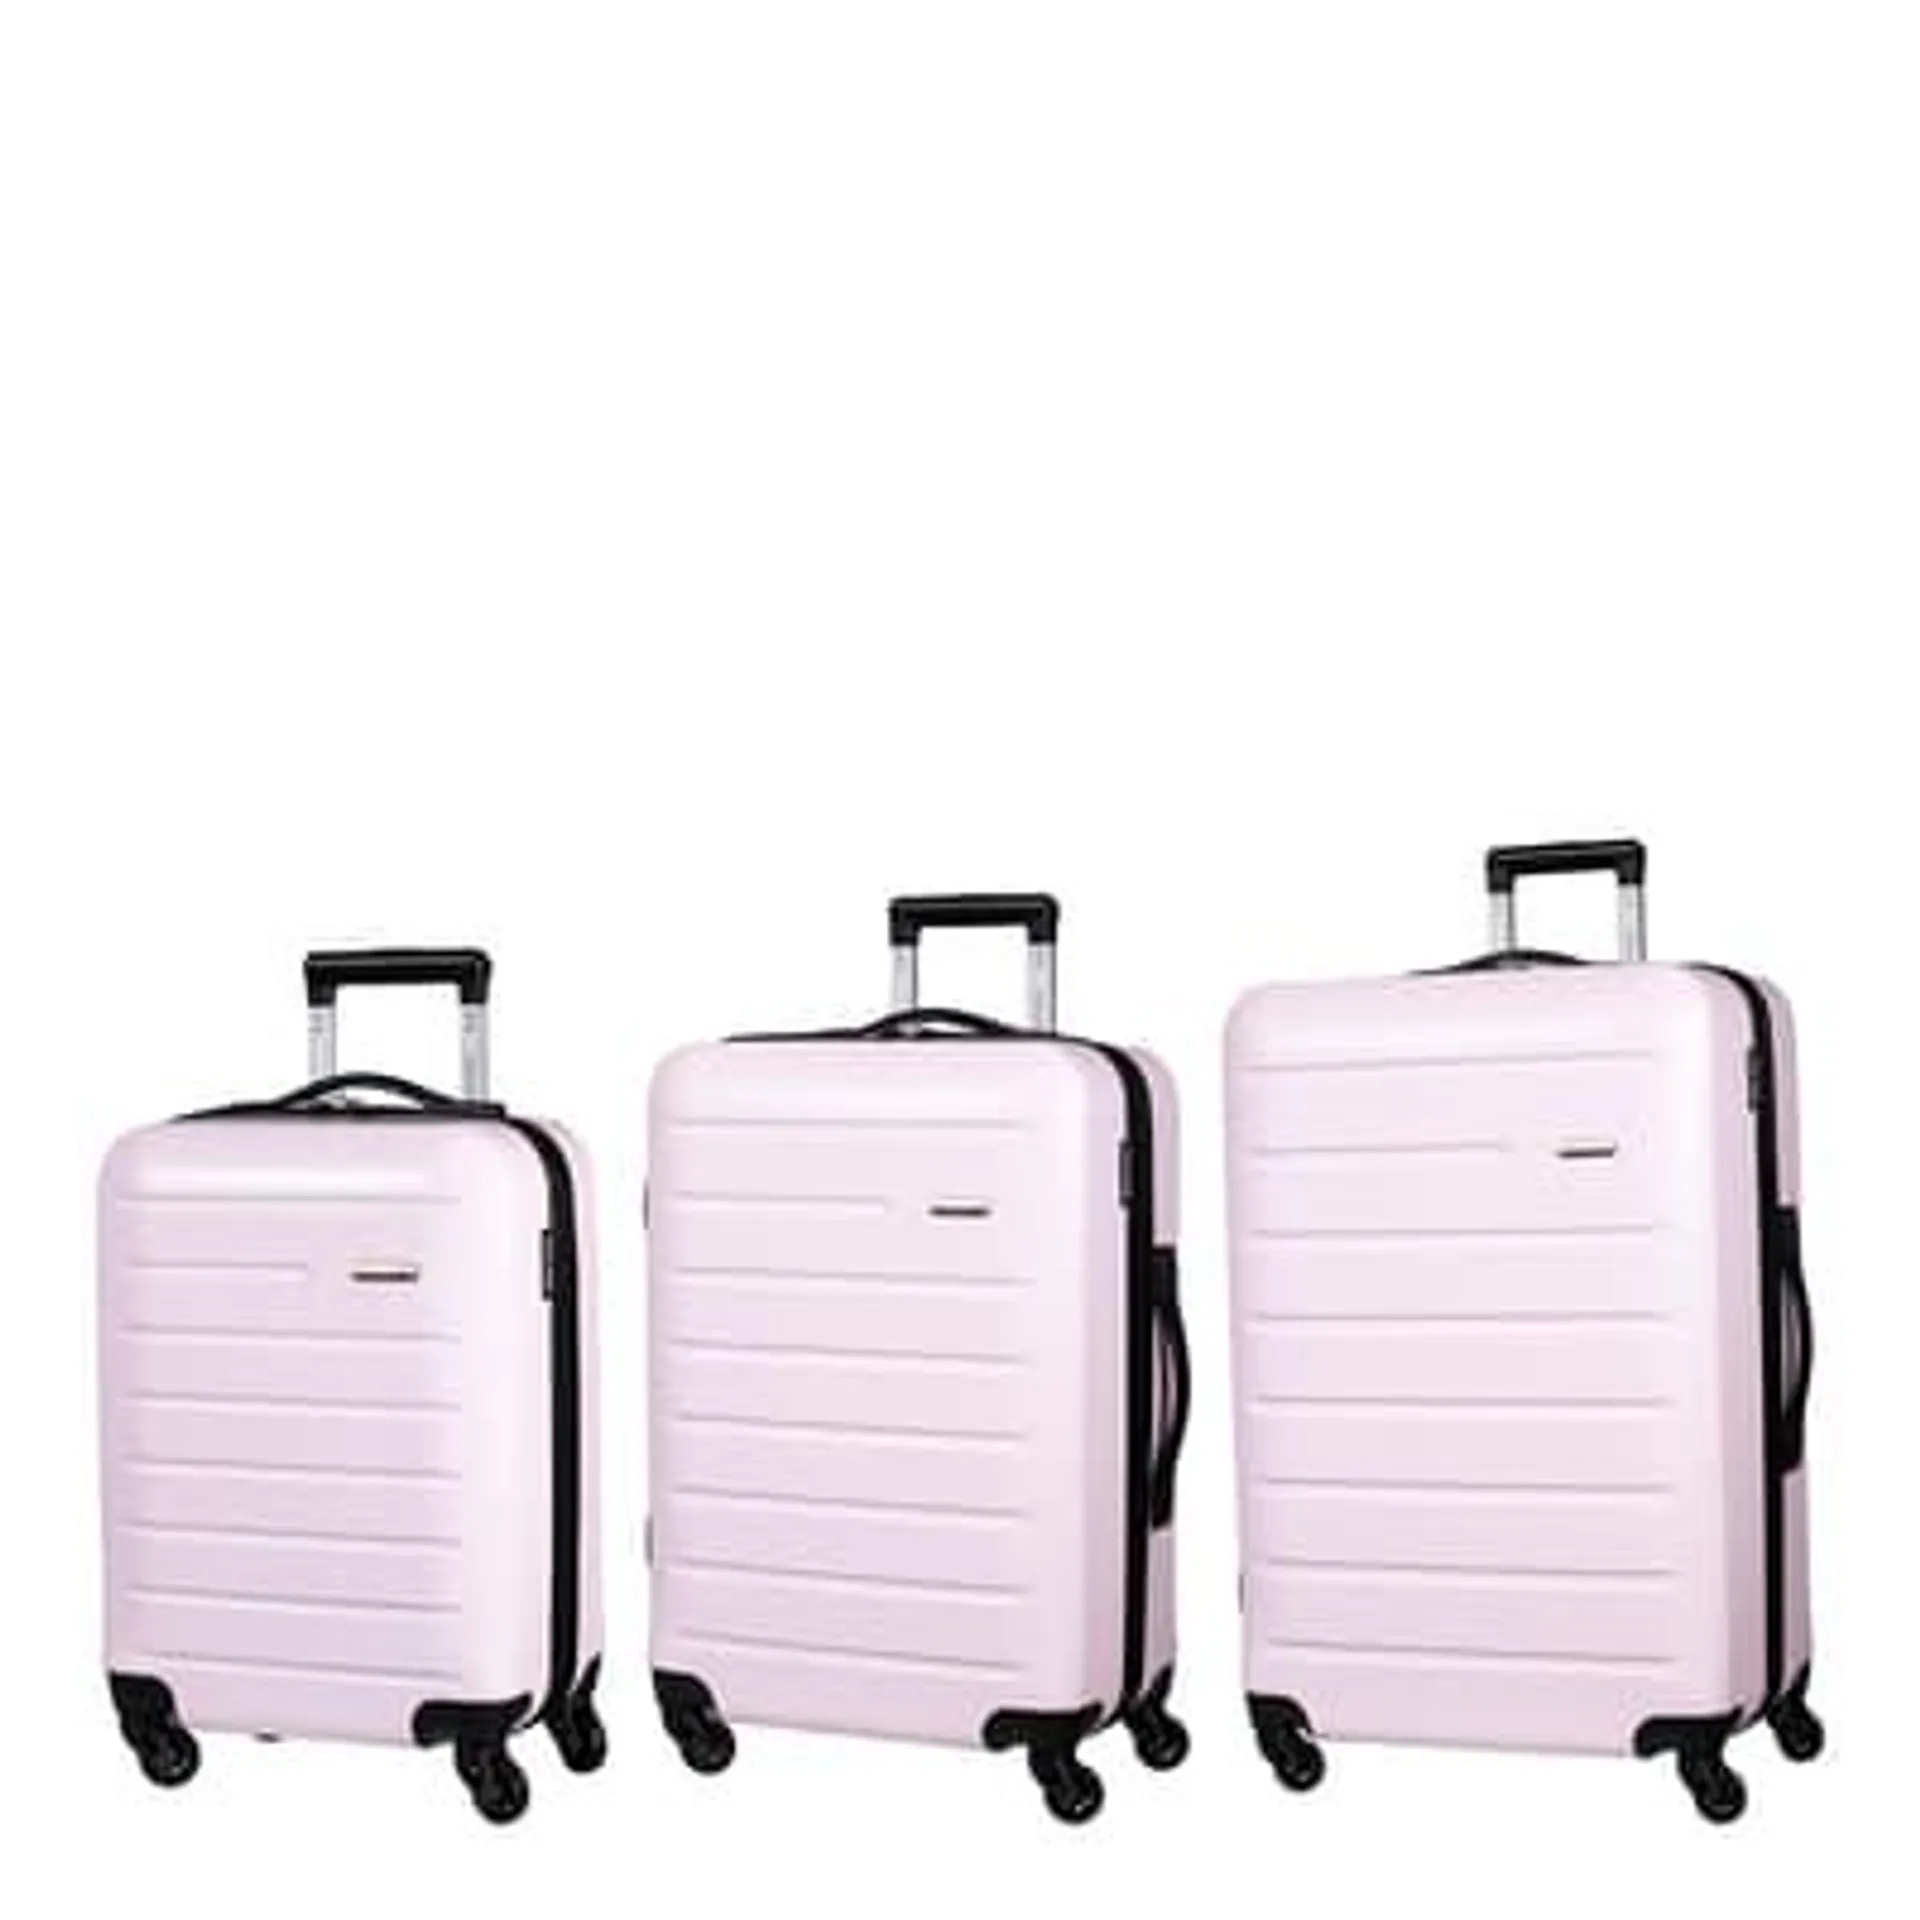 New In: Pierre Cardin Luggage Sets